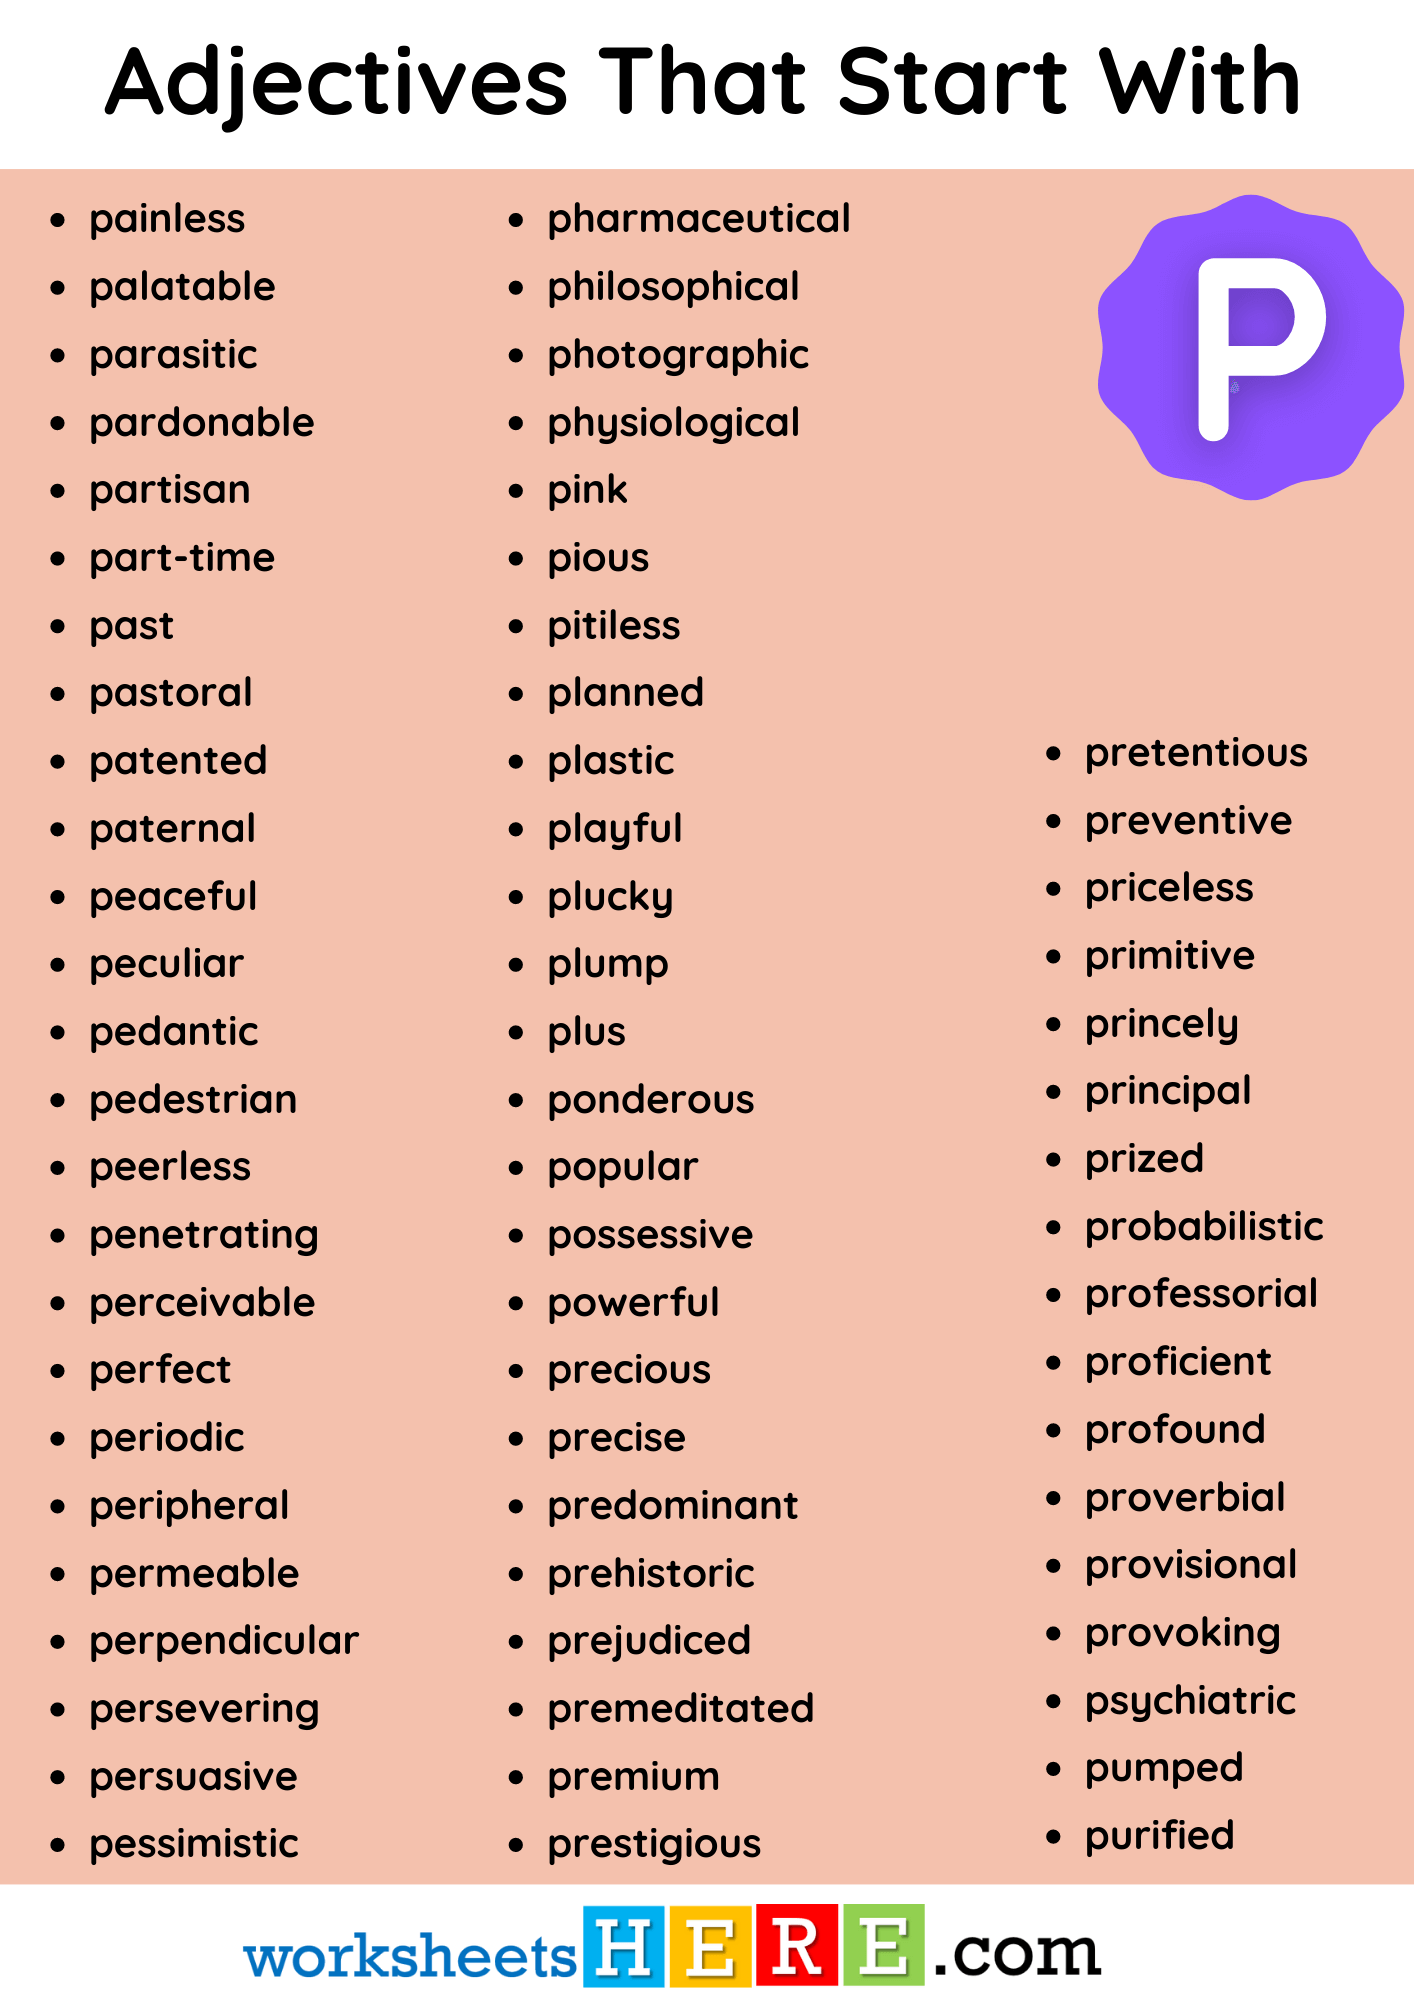 Adjectives That Start With P Vocabulary List PDF Worksheet For Students